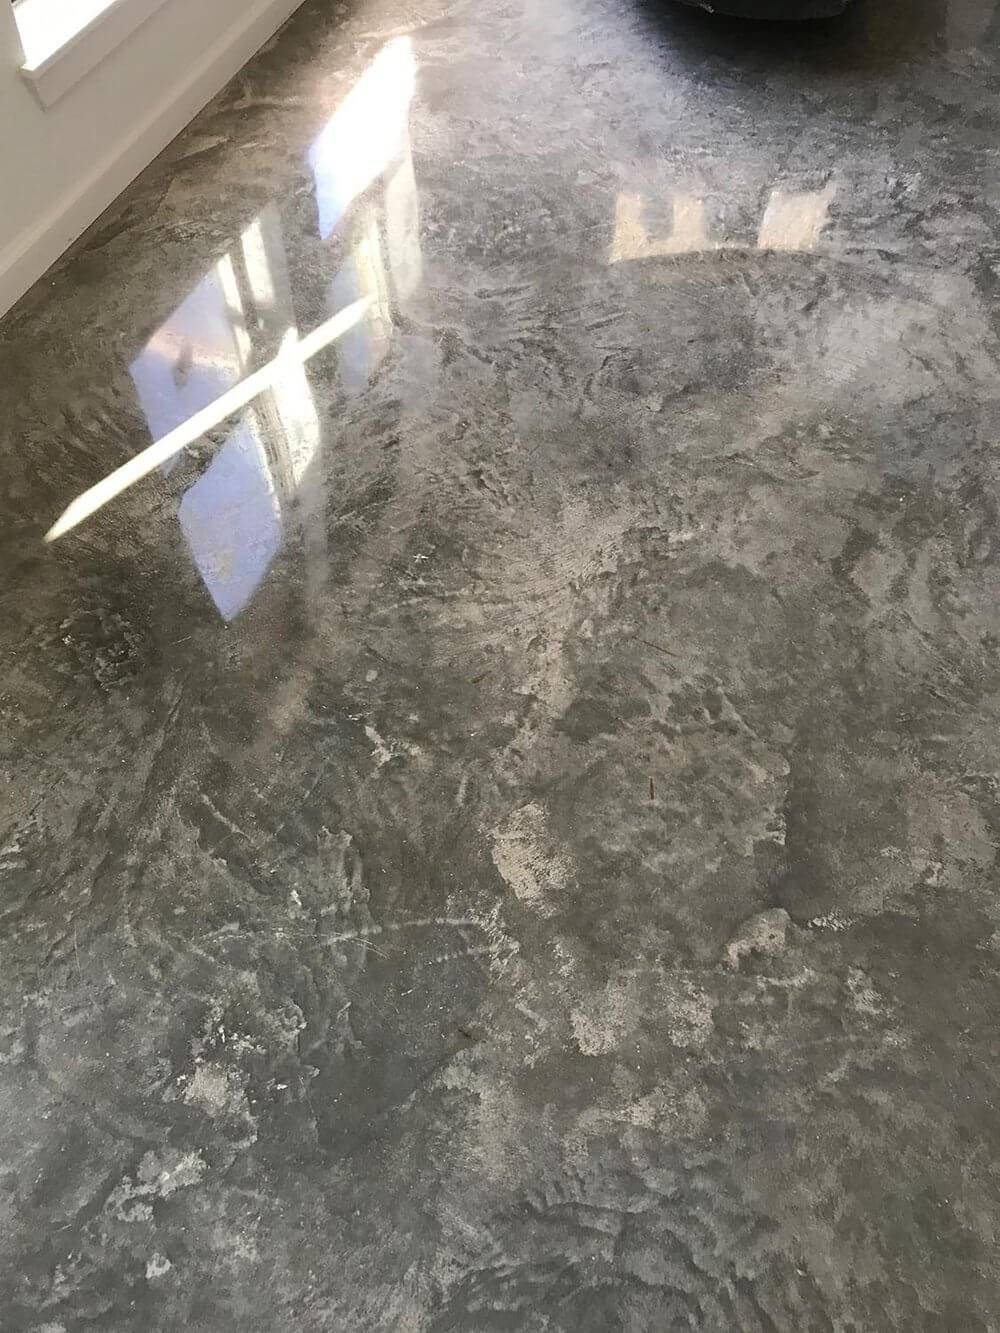 A 10% fly ash, cream polished Craftsman Concrete floor. The high fly ash content increases the depth of the natural design on the floor’s surface and allows for a highly reflective finish.